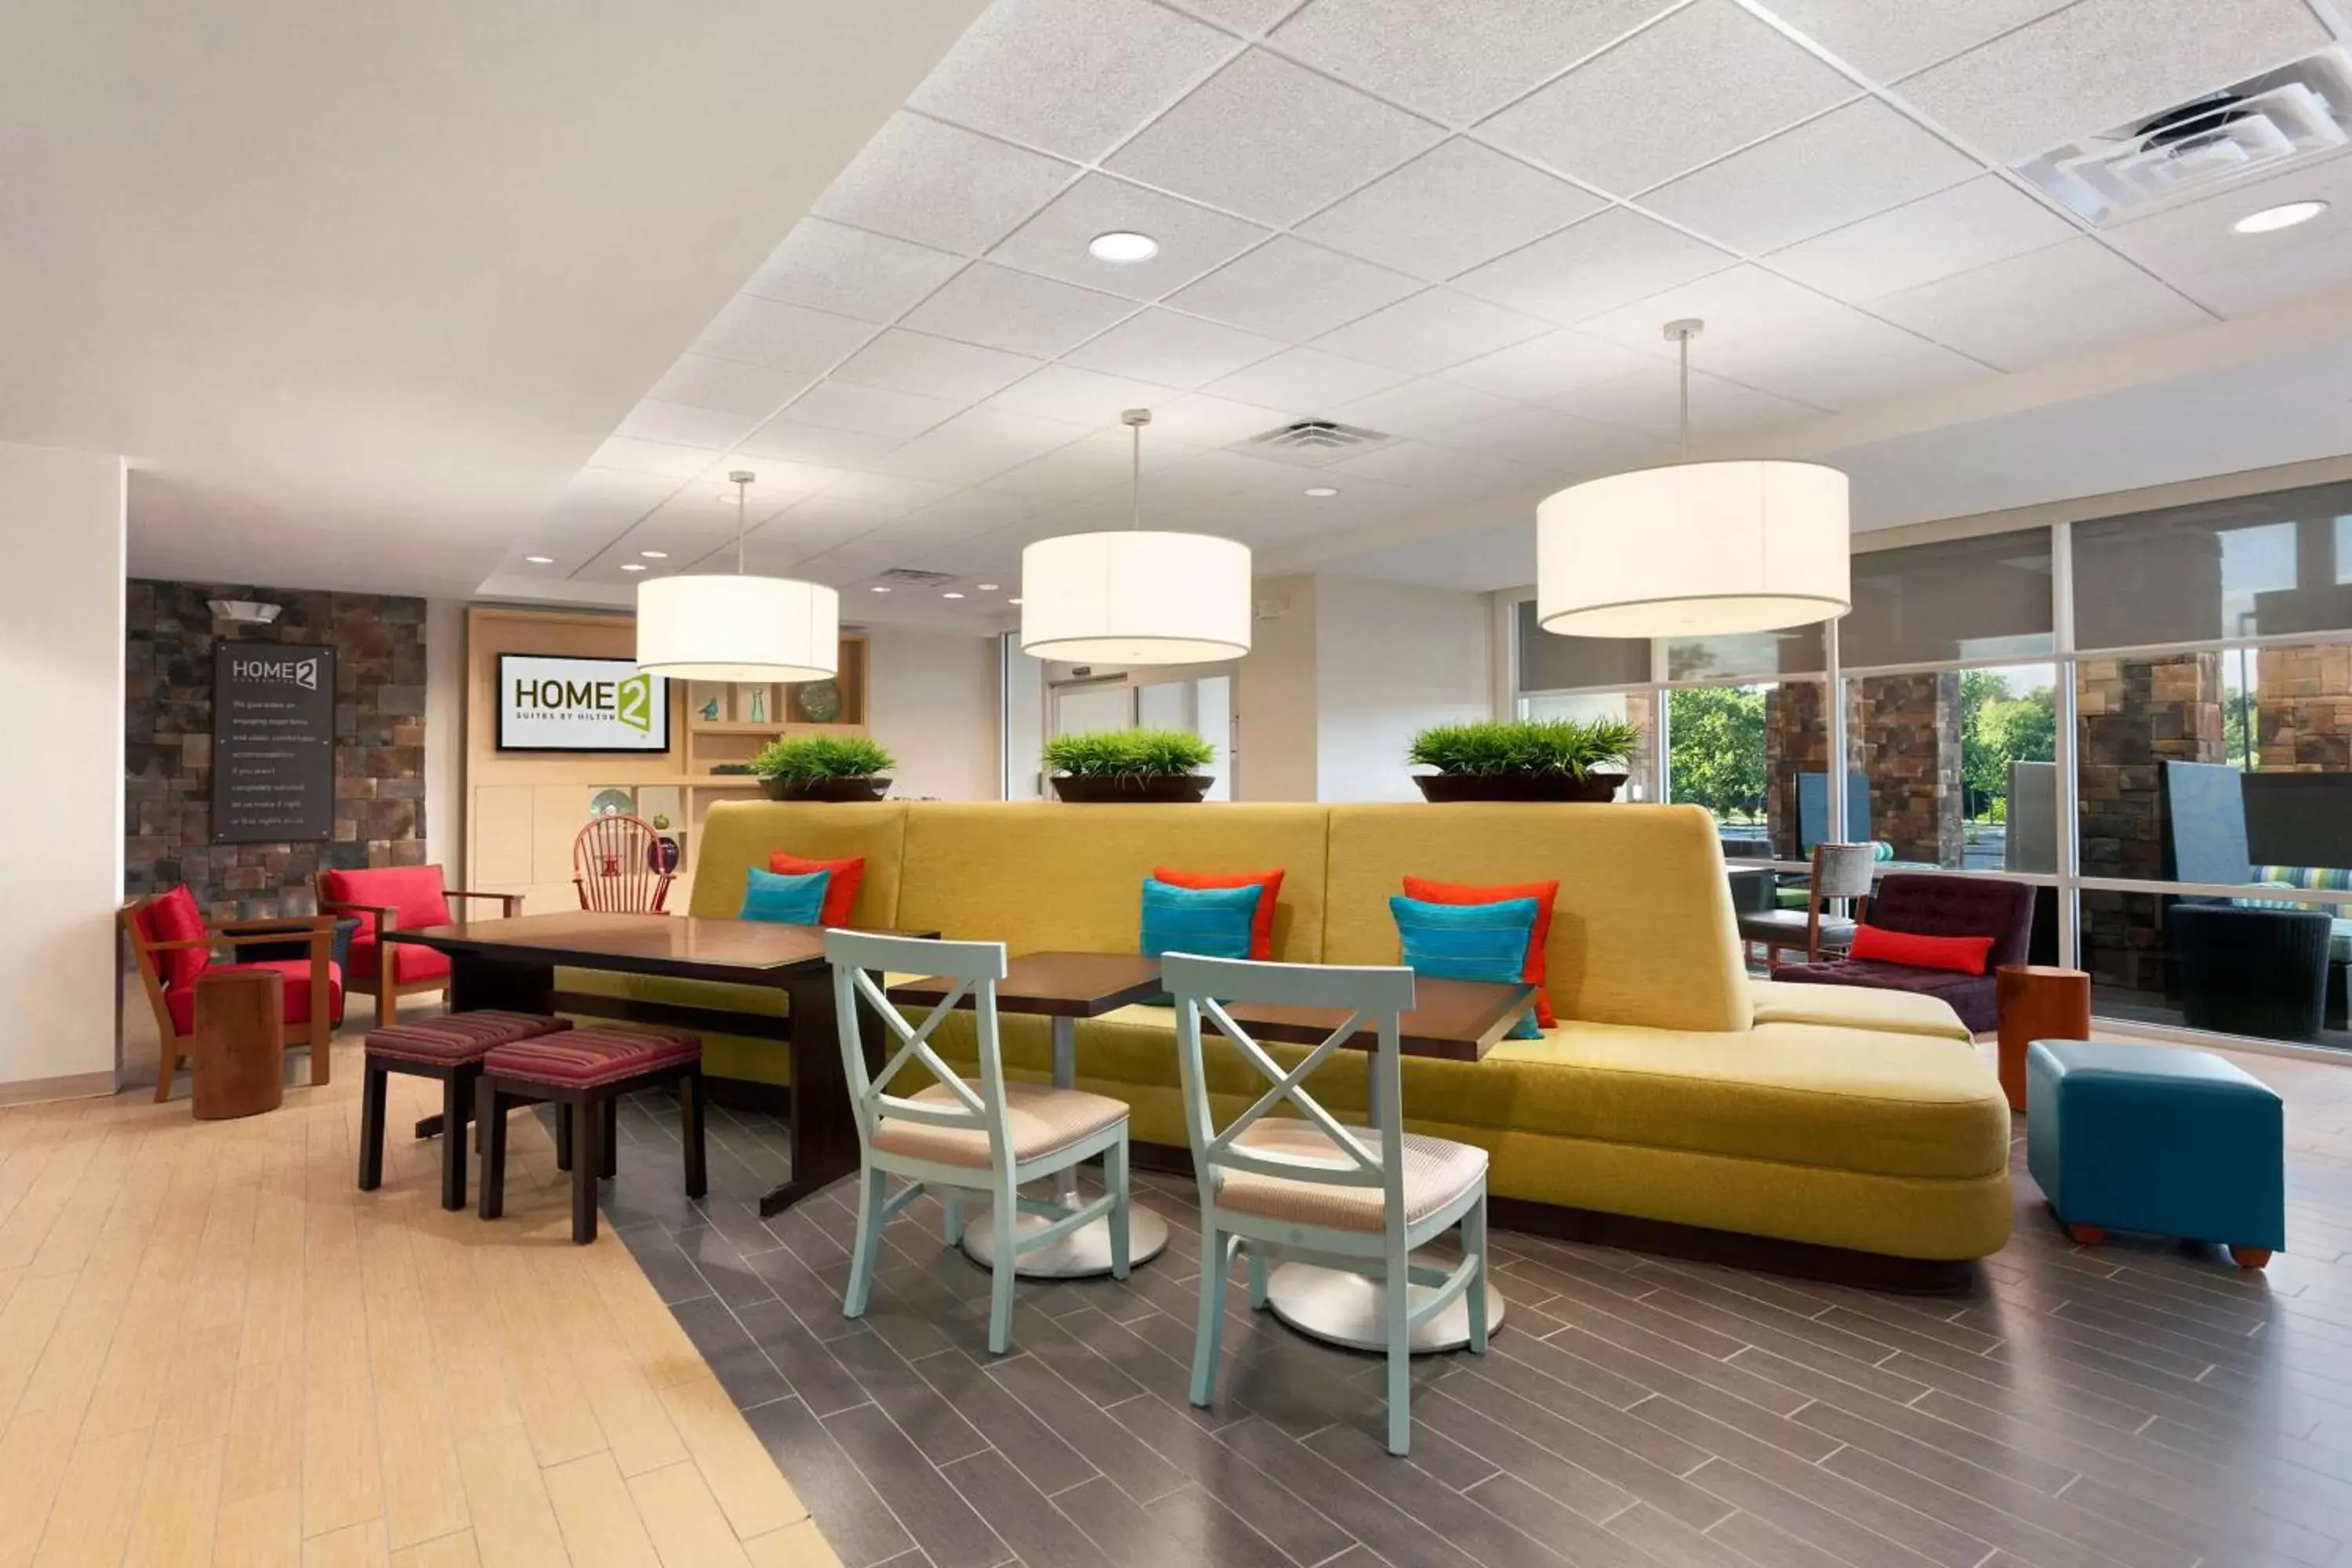 Lobby or reception in Home2 Suites by Hilton Pittsburgh - McCandless, PA